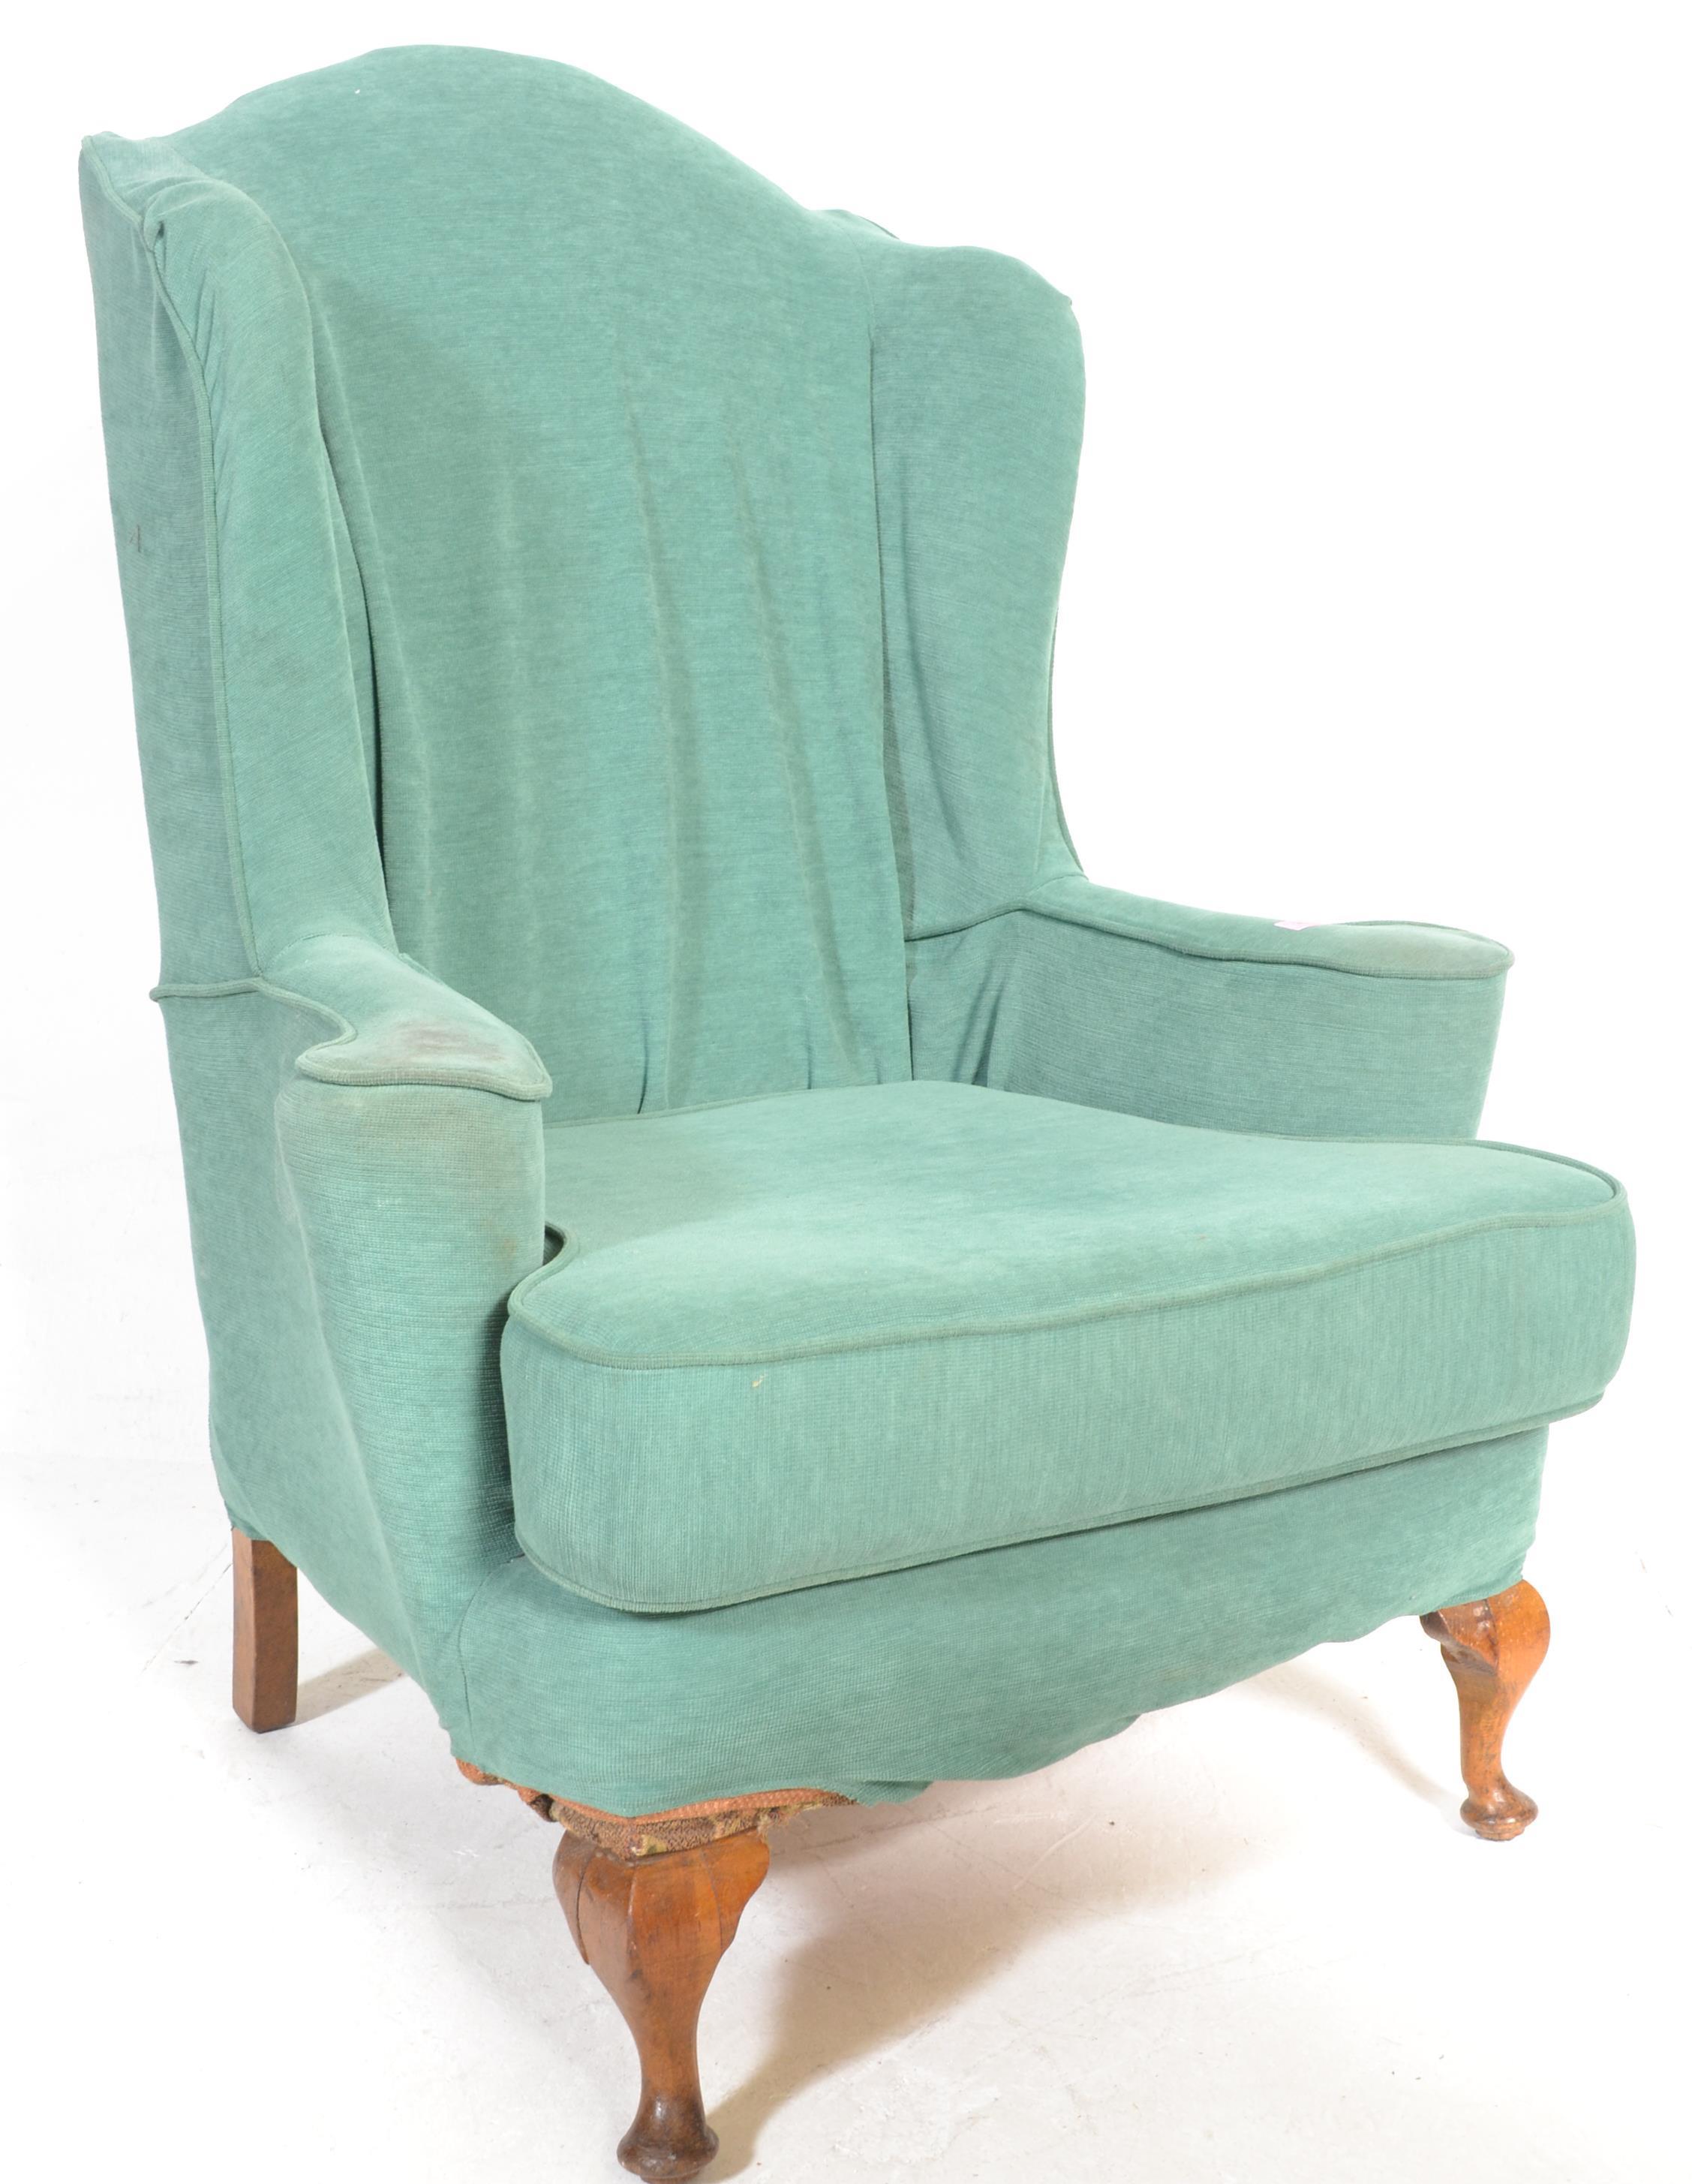 A 20th century antique style large Georgian revival wing back armchair...